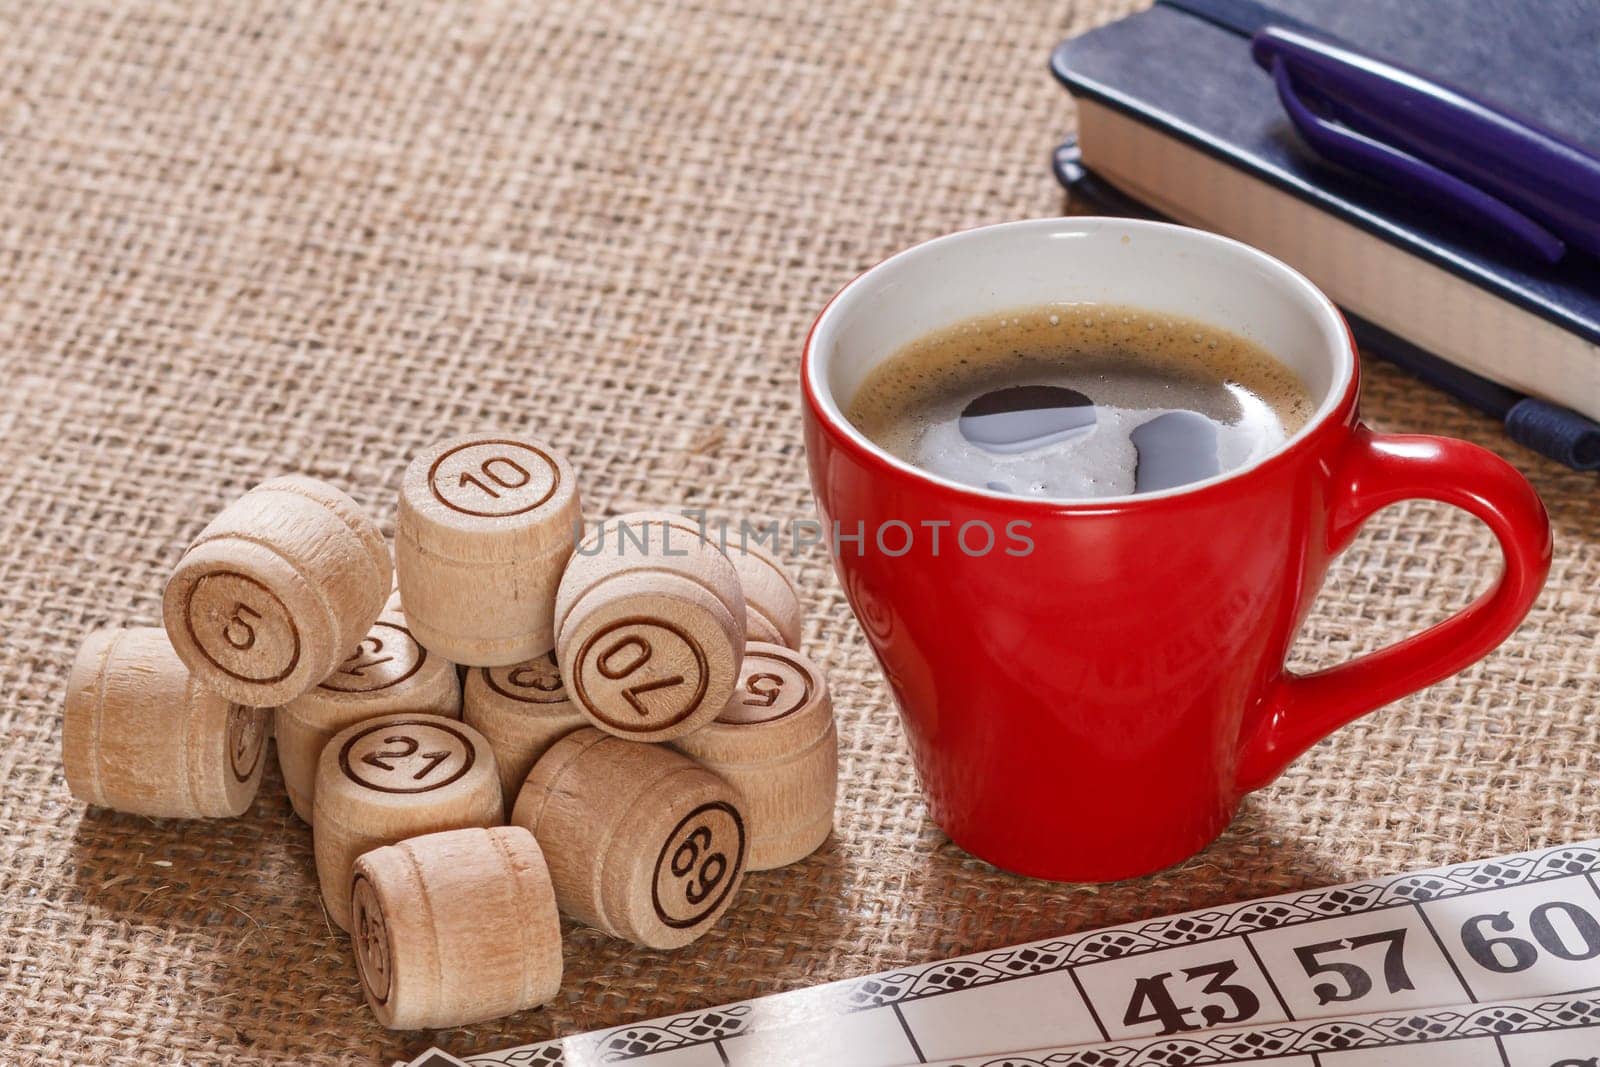 Board game lotto on sackcloth. Wooden lotto barrels and game cards with cup of coffee, notebook and pen. by mvg6894